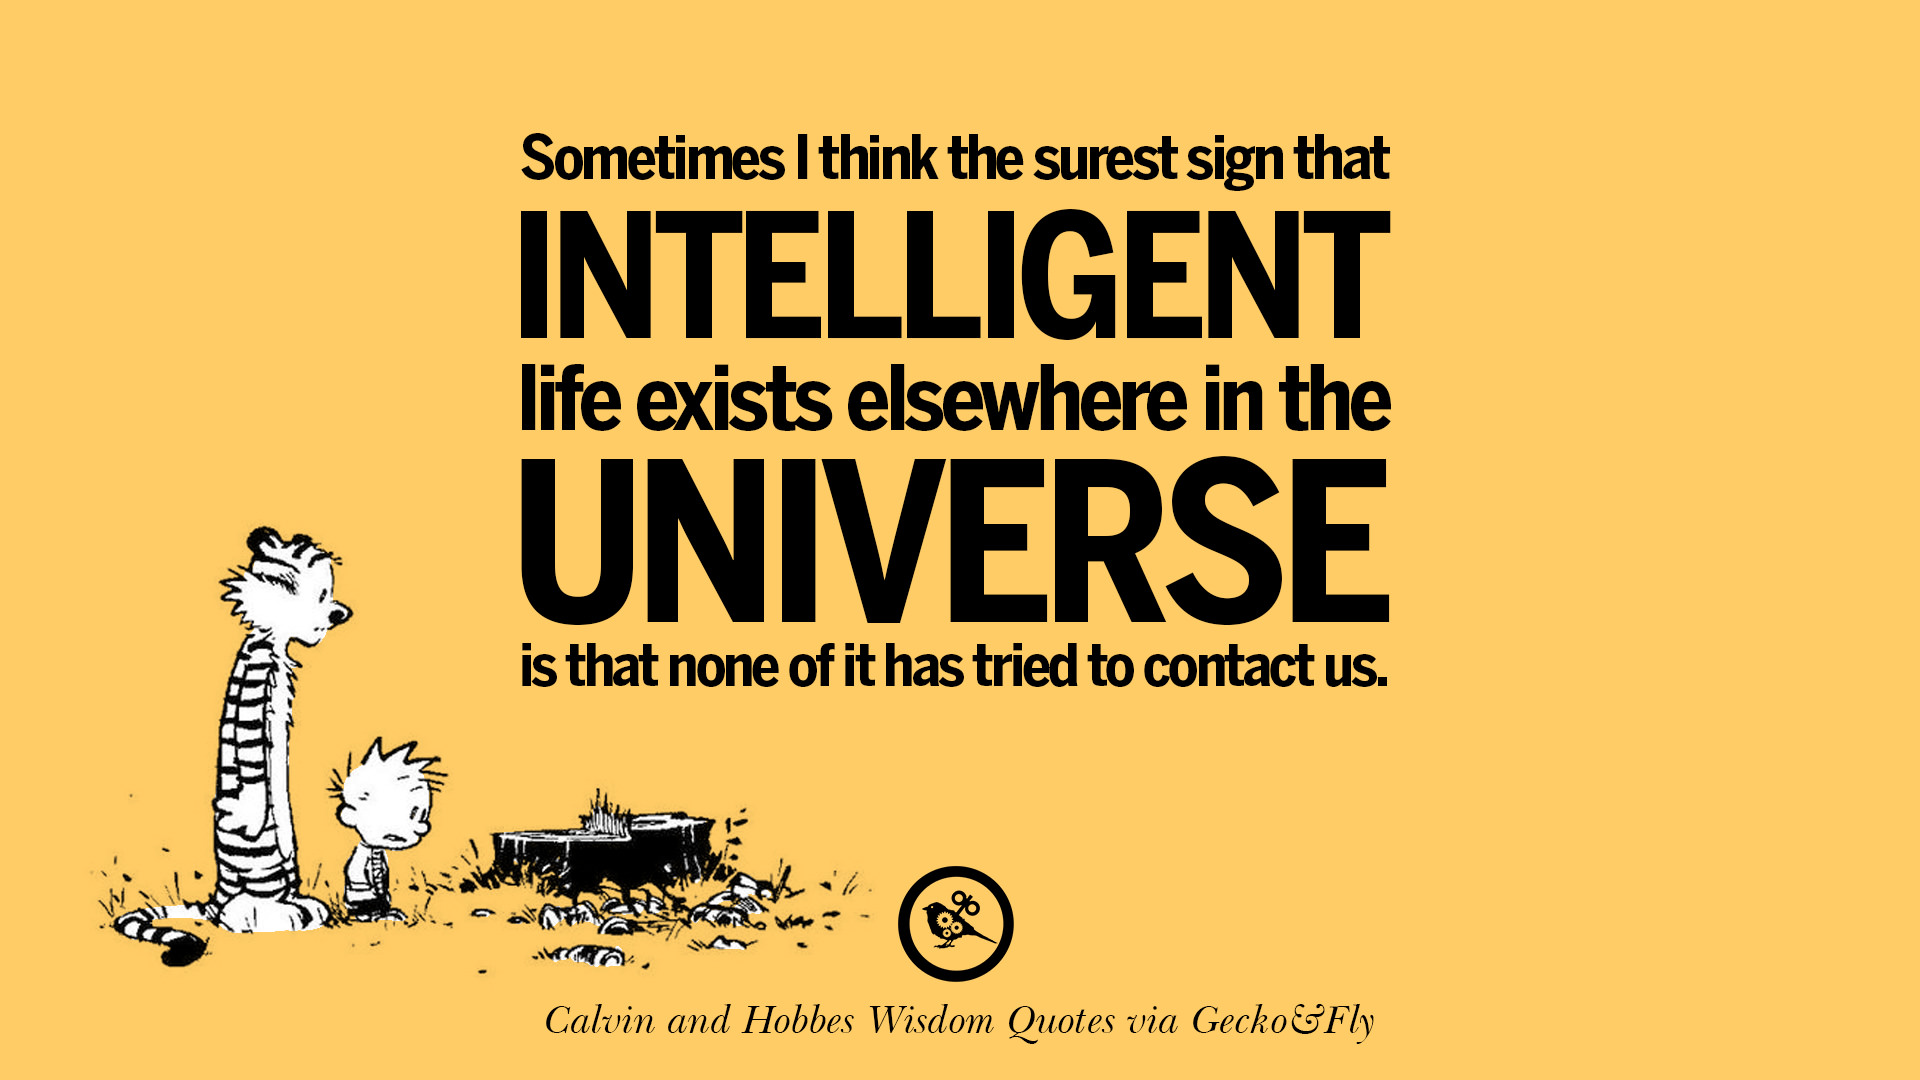 Calvin And Hobbes Popular Quotes Wallpaper Image Photo